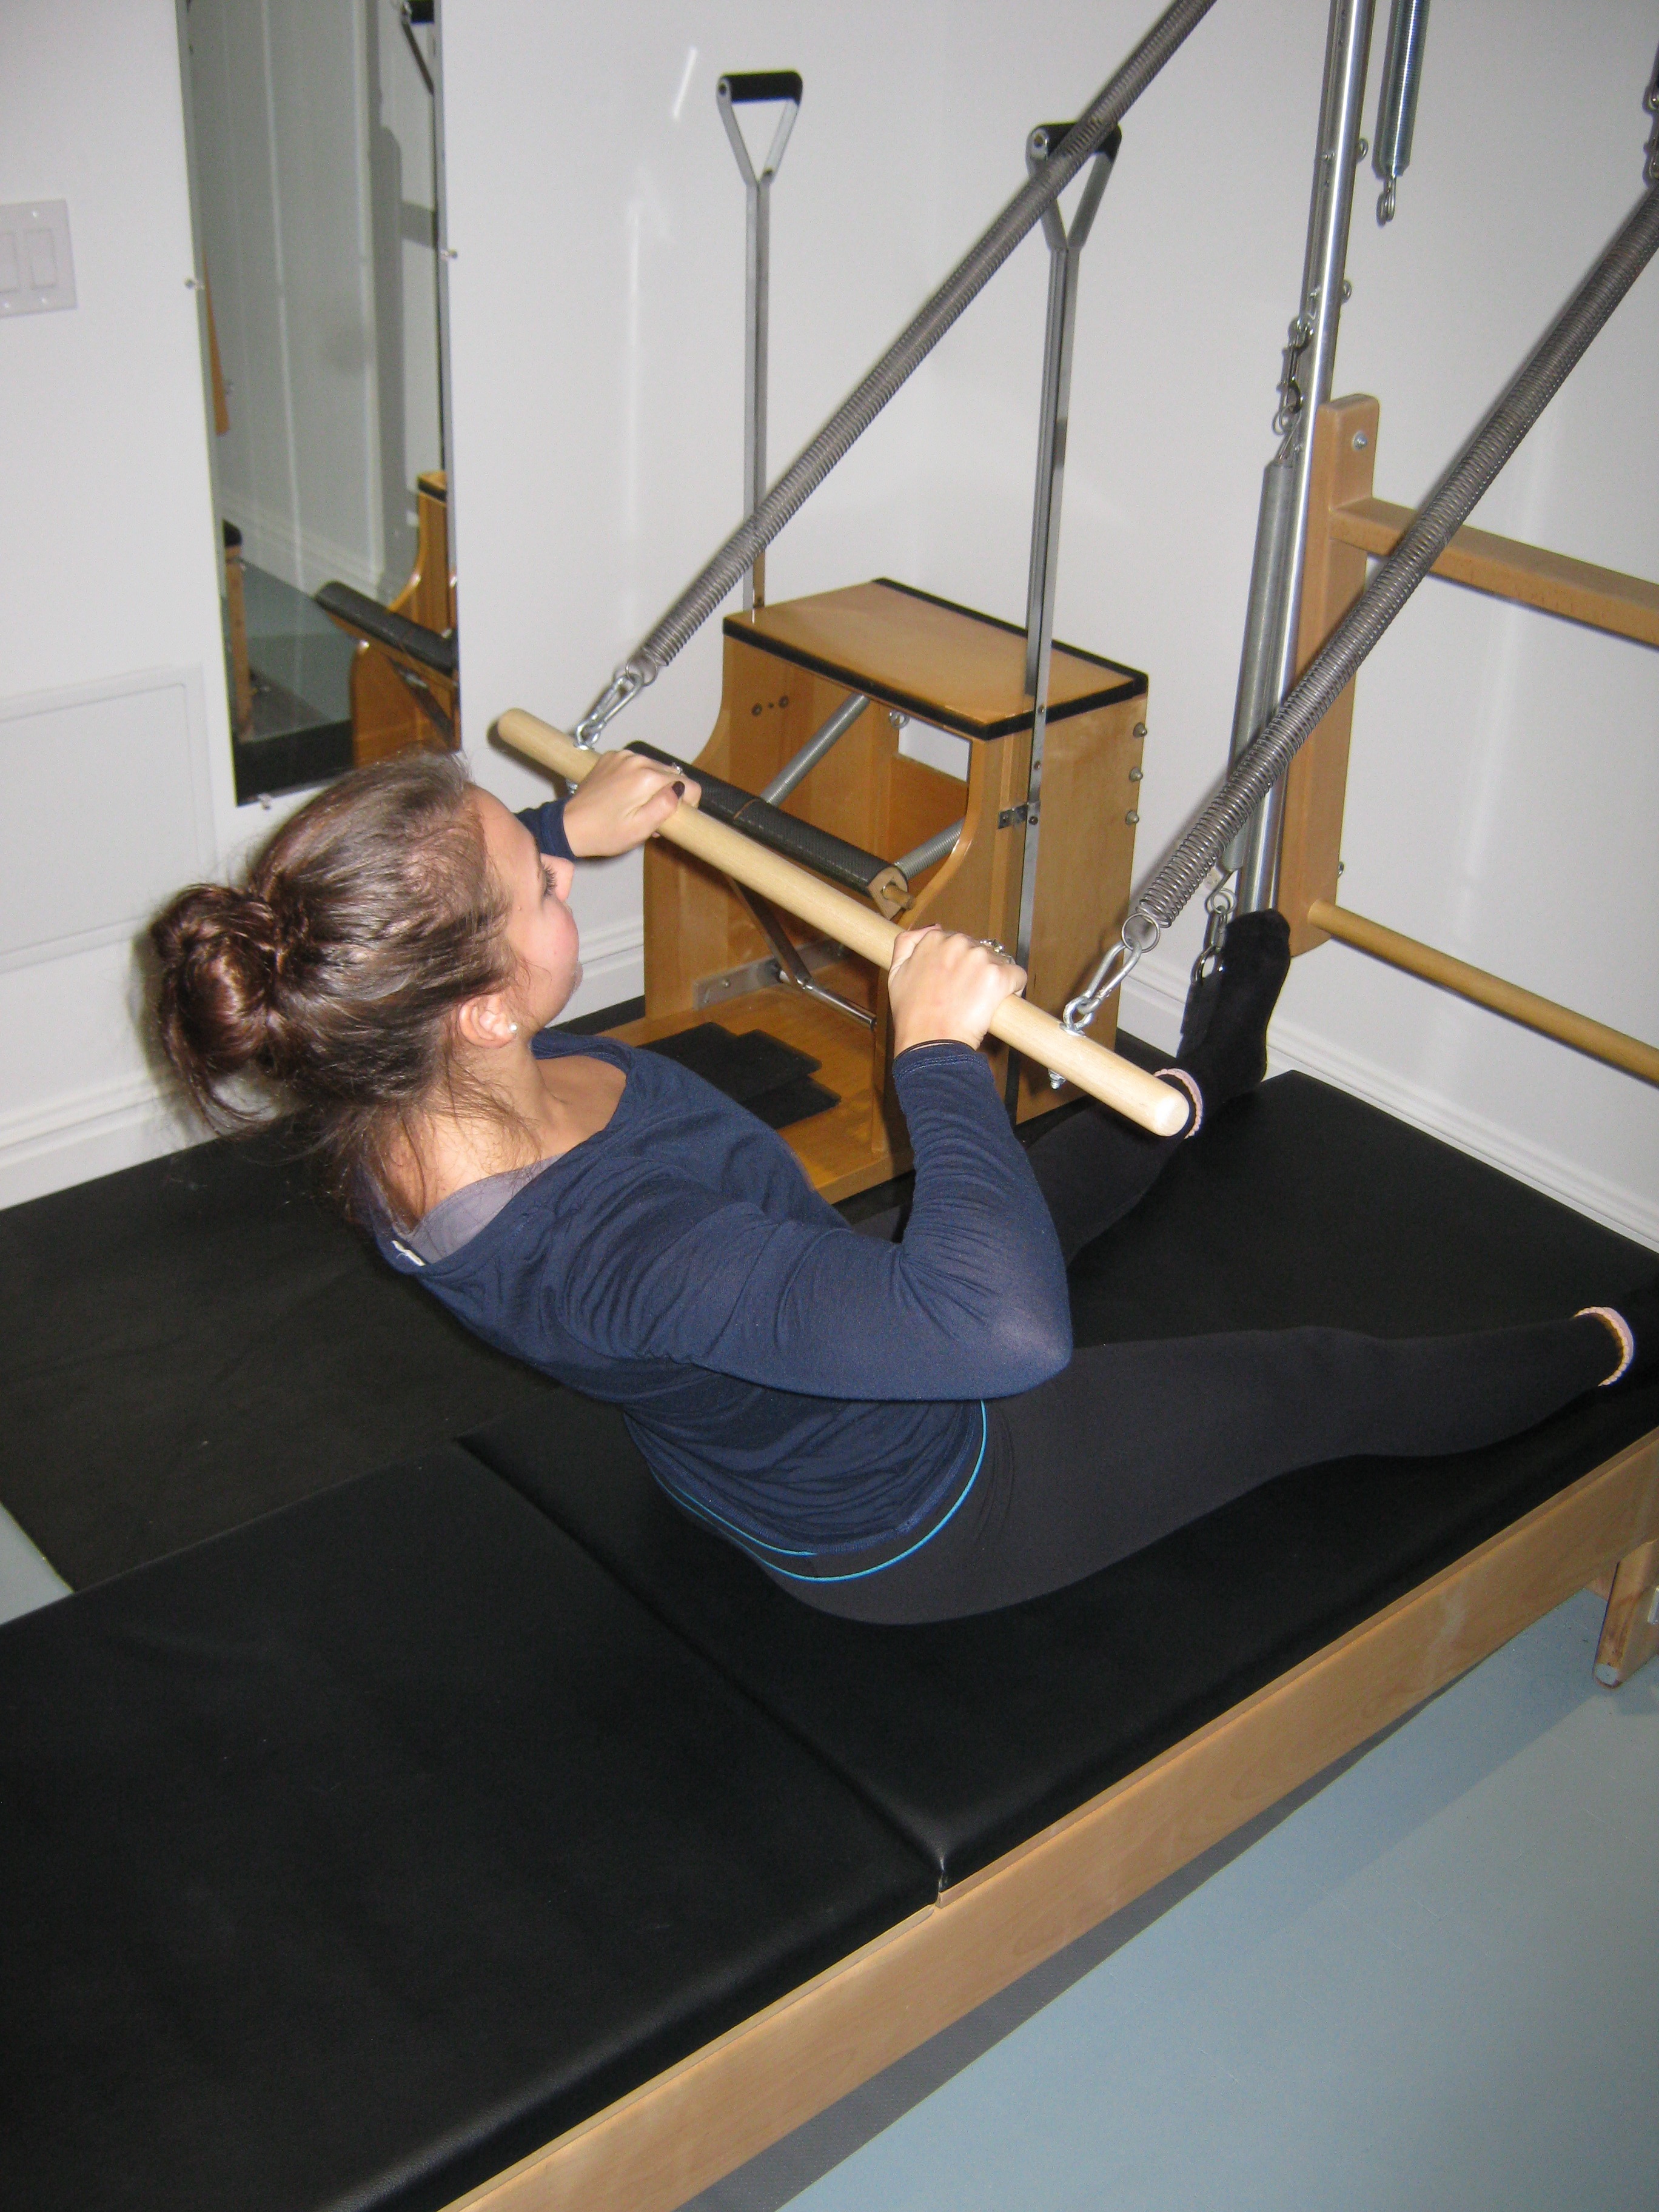 Pilates Roll Down Bar Exercise for abdominal strength & pectoral muscle toning